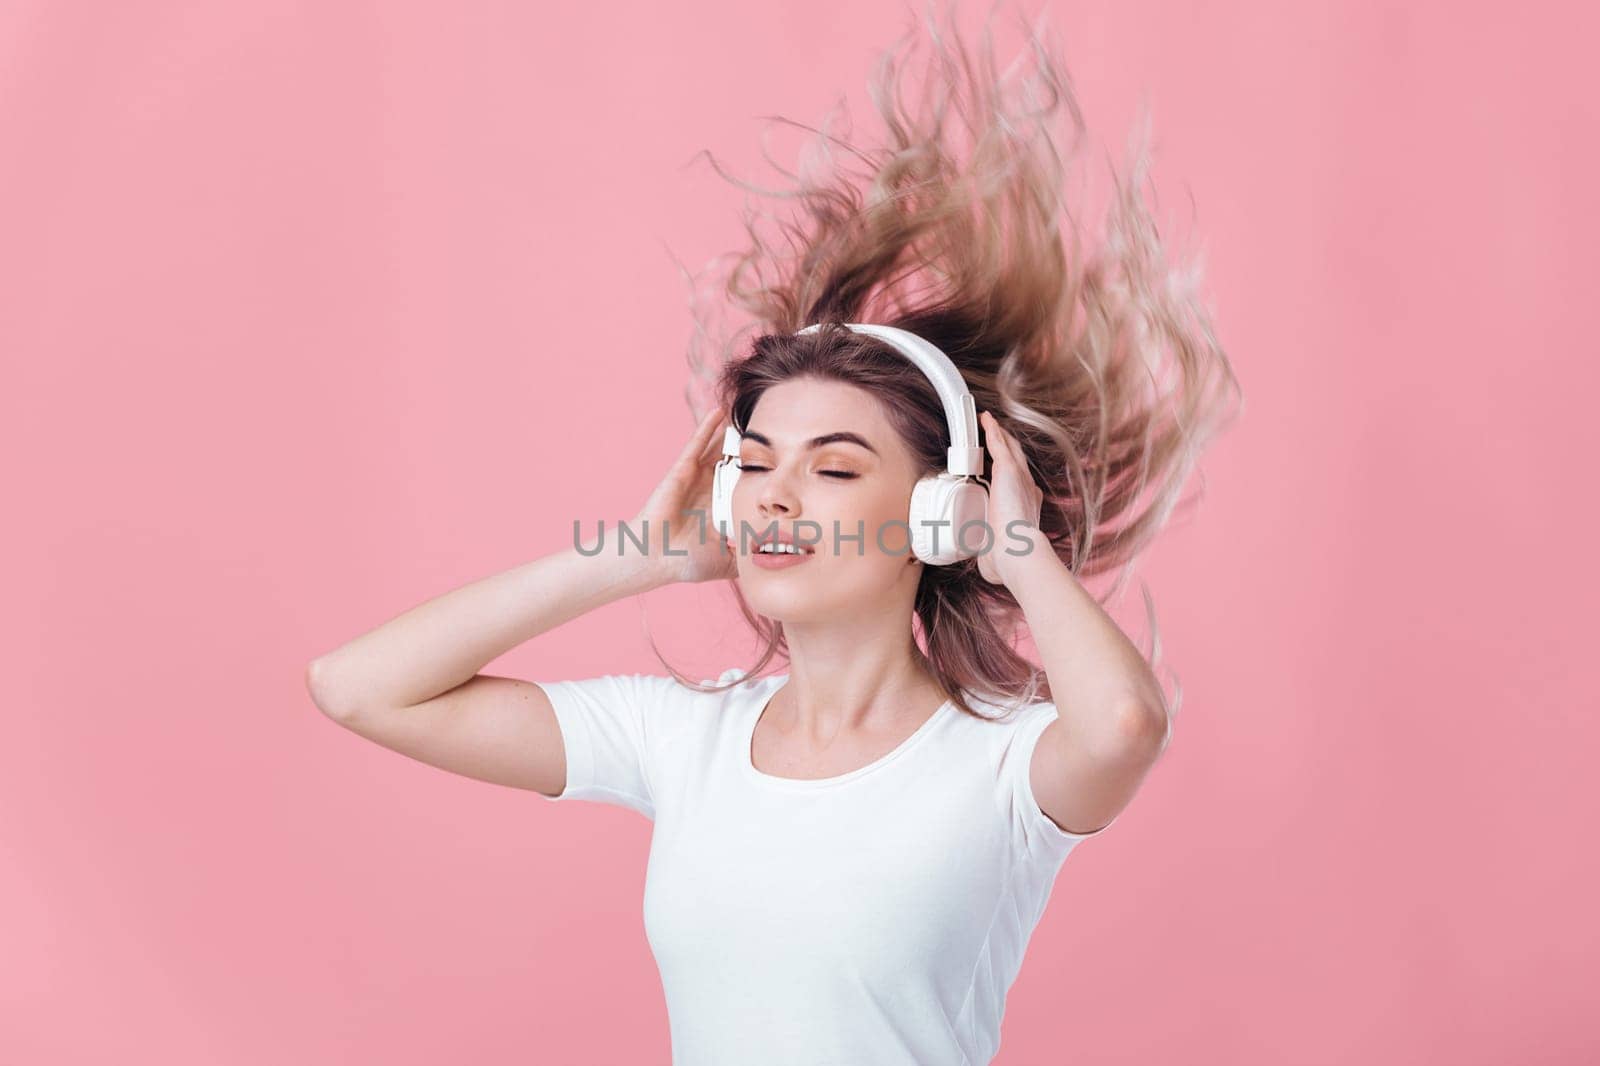 beautiful blonde woman in t-shirt and white headphones listens to music on pink background. hair fly